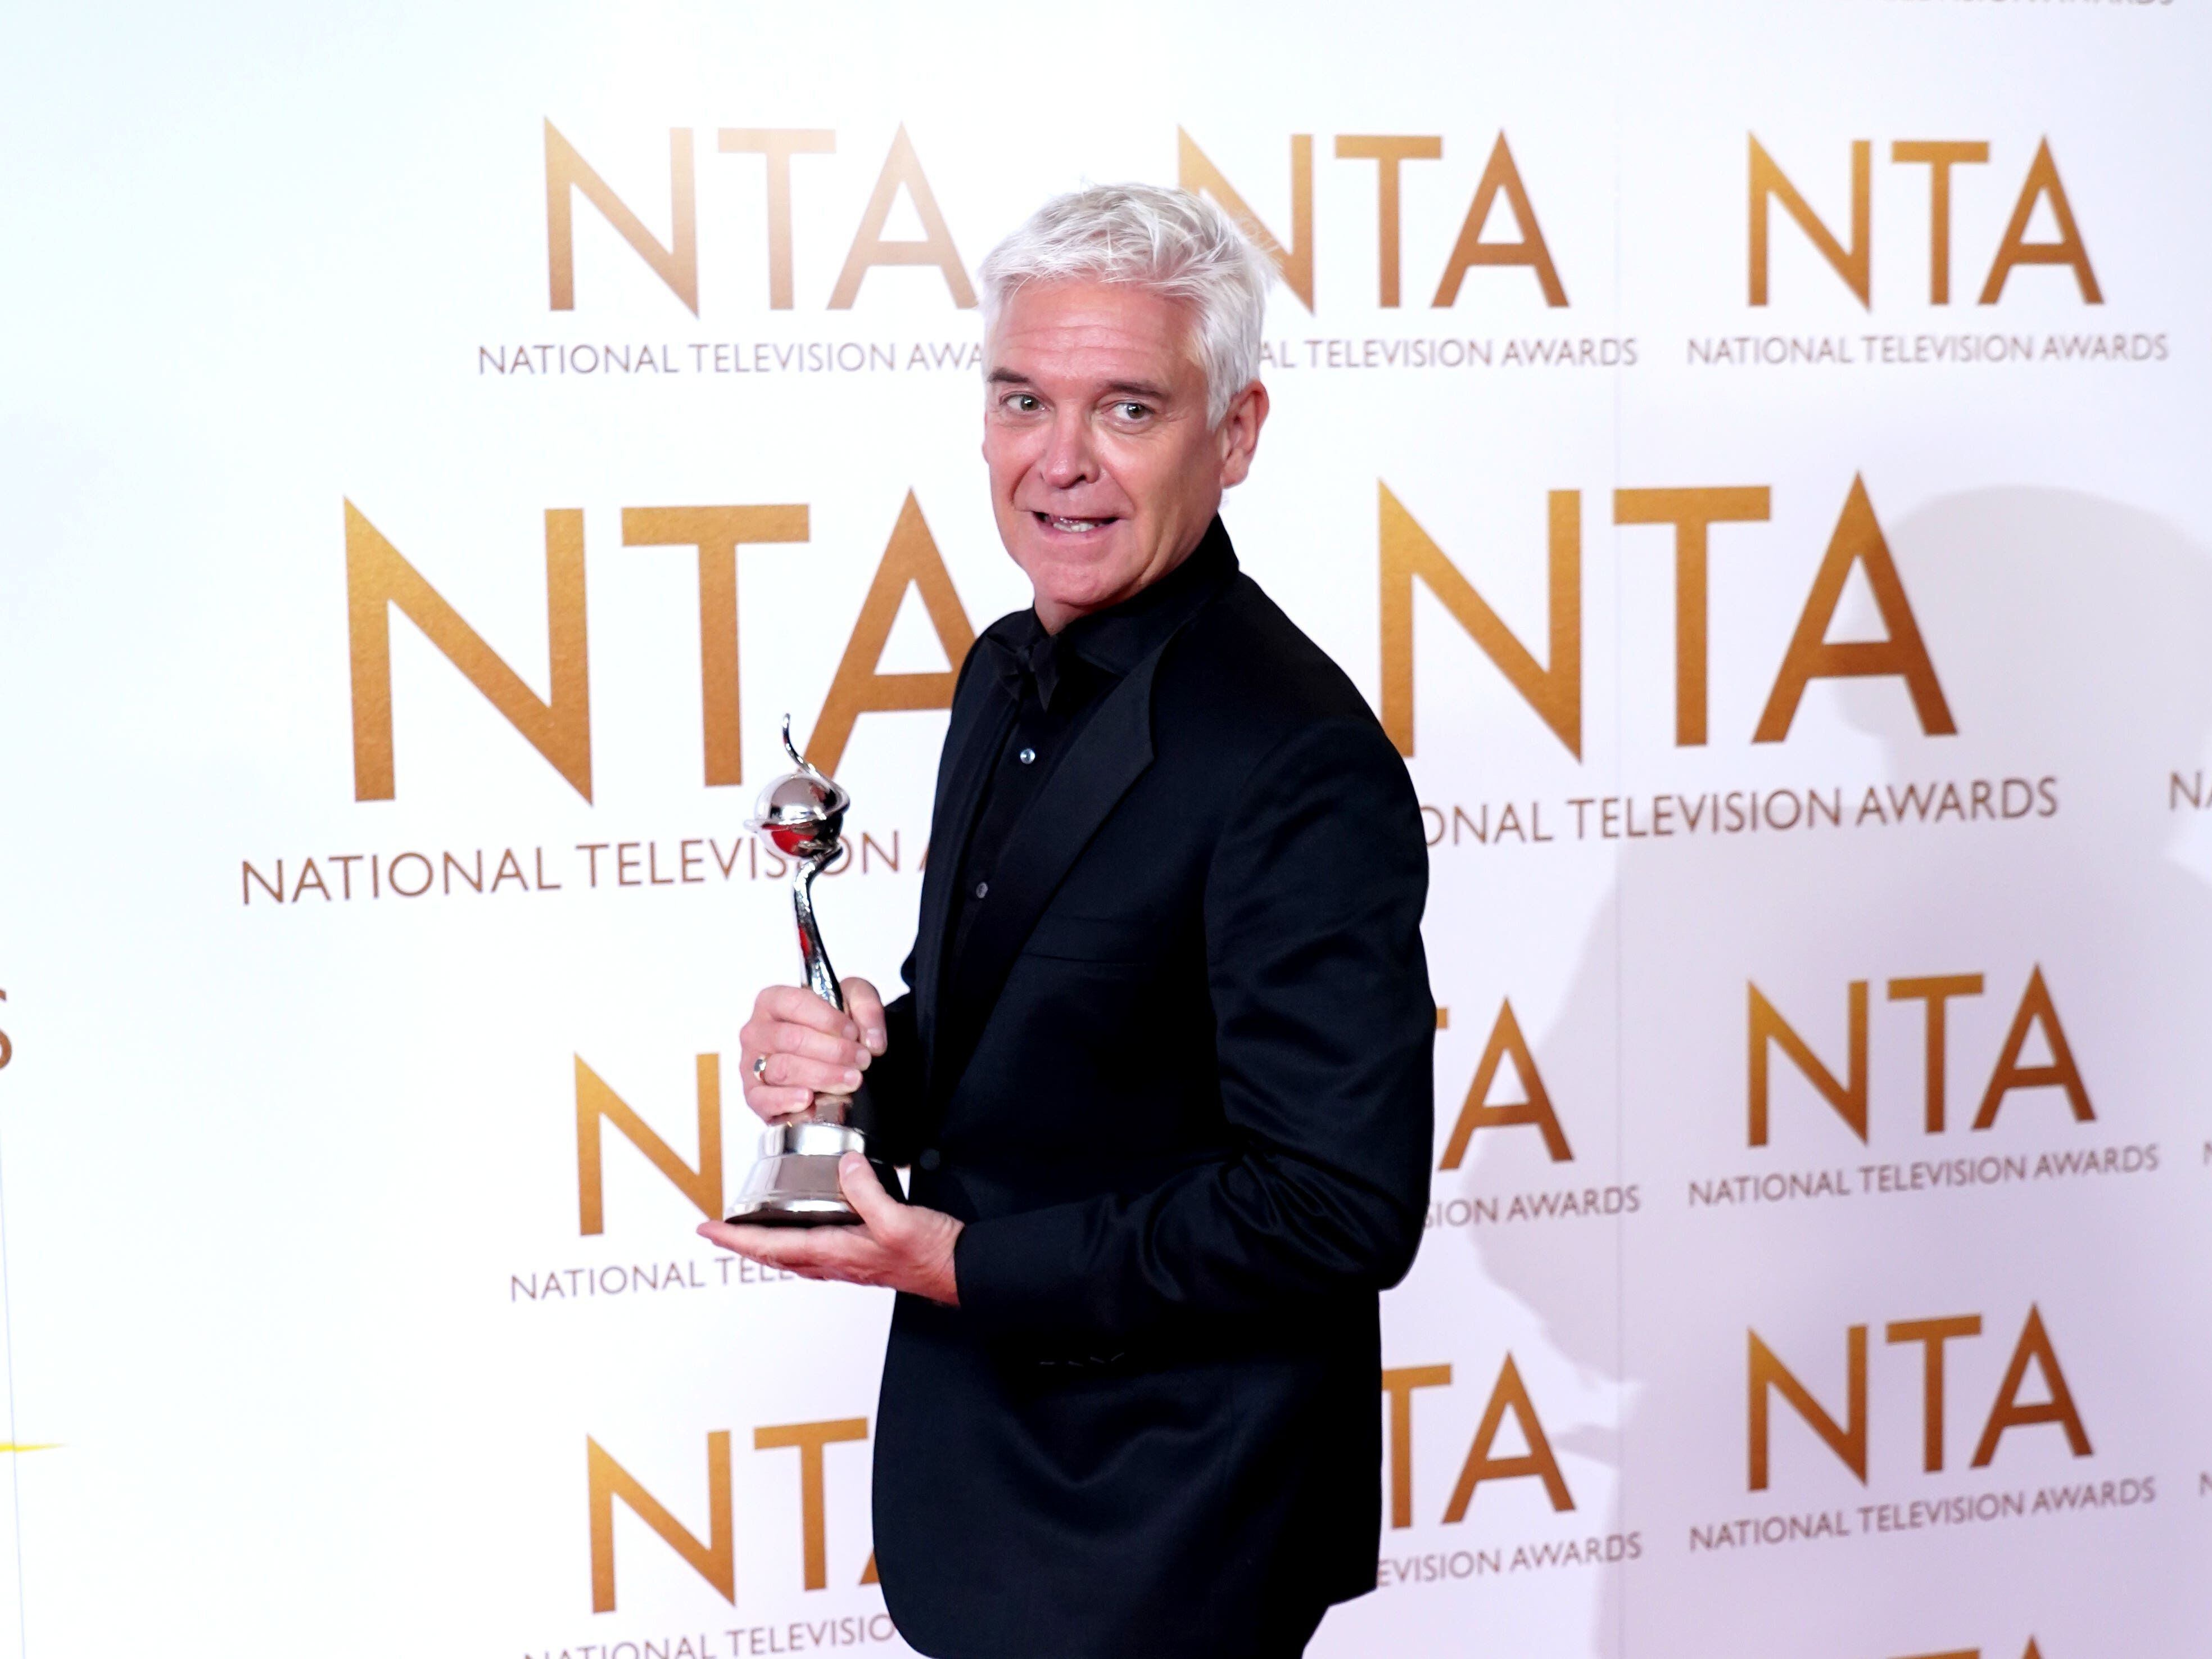 Phillip Schofield and This Morning: So what’s next?